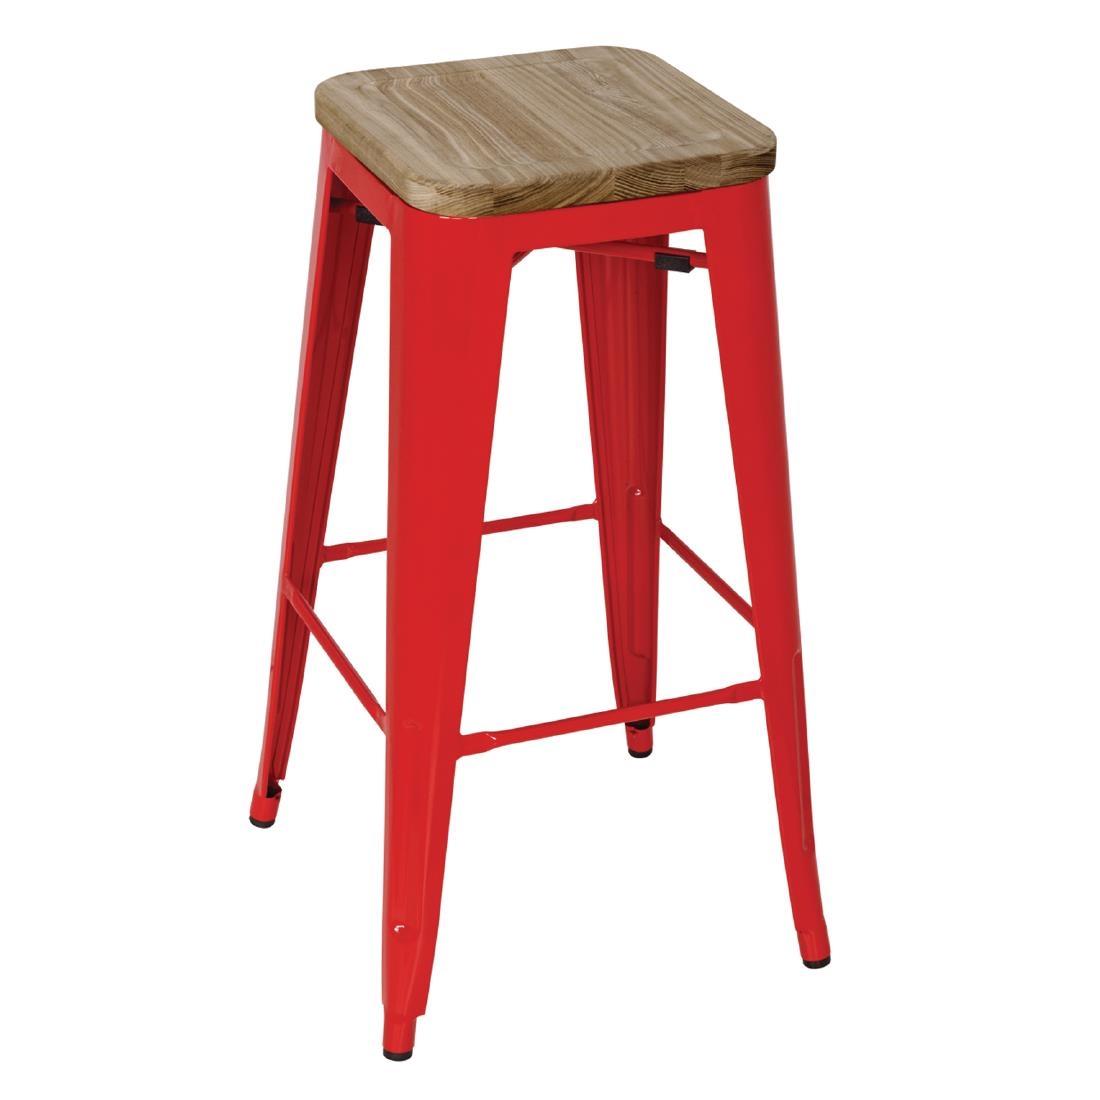 Bolero Bistro High Stools with Wooden Seat Pad Red (Pack of 4) - GM641  - 1